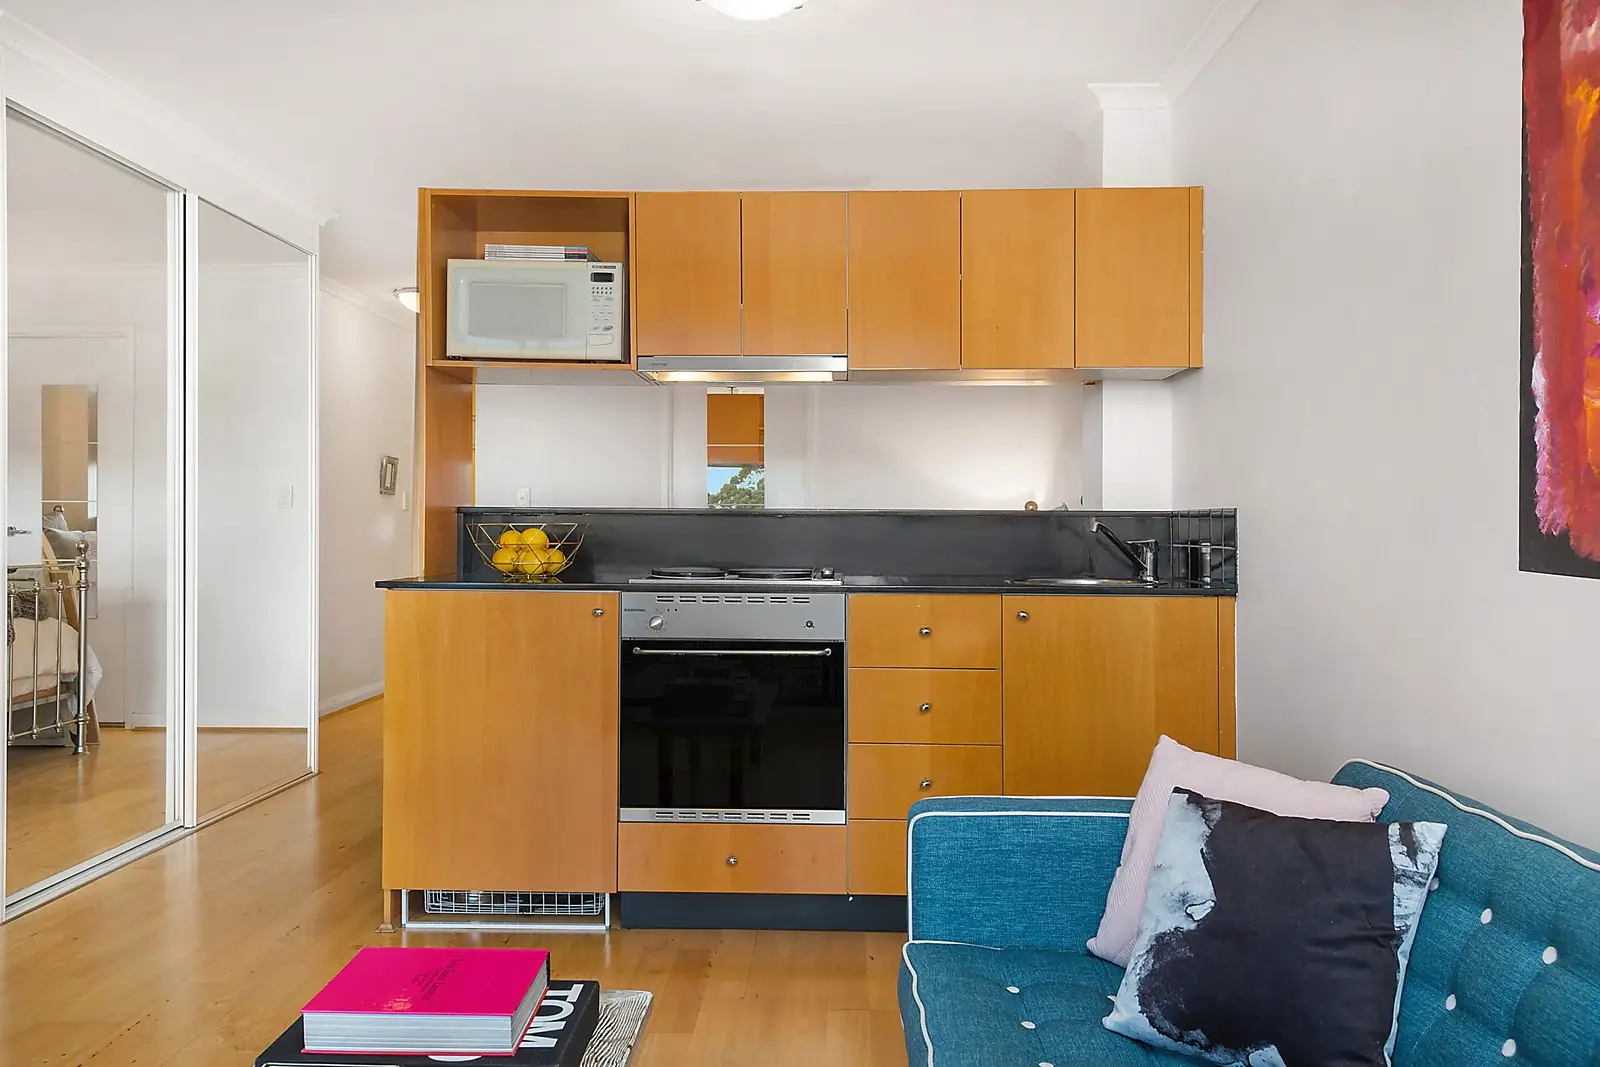 Photo #3: 504/508 Riley Street, Surry Hills - Sold by Sydney Sotheby's International Realty